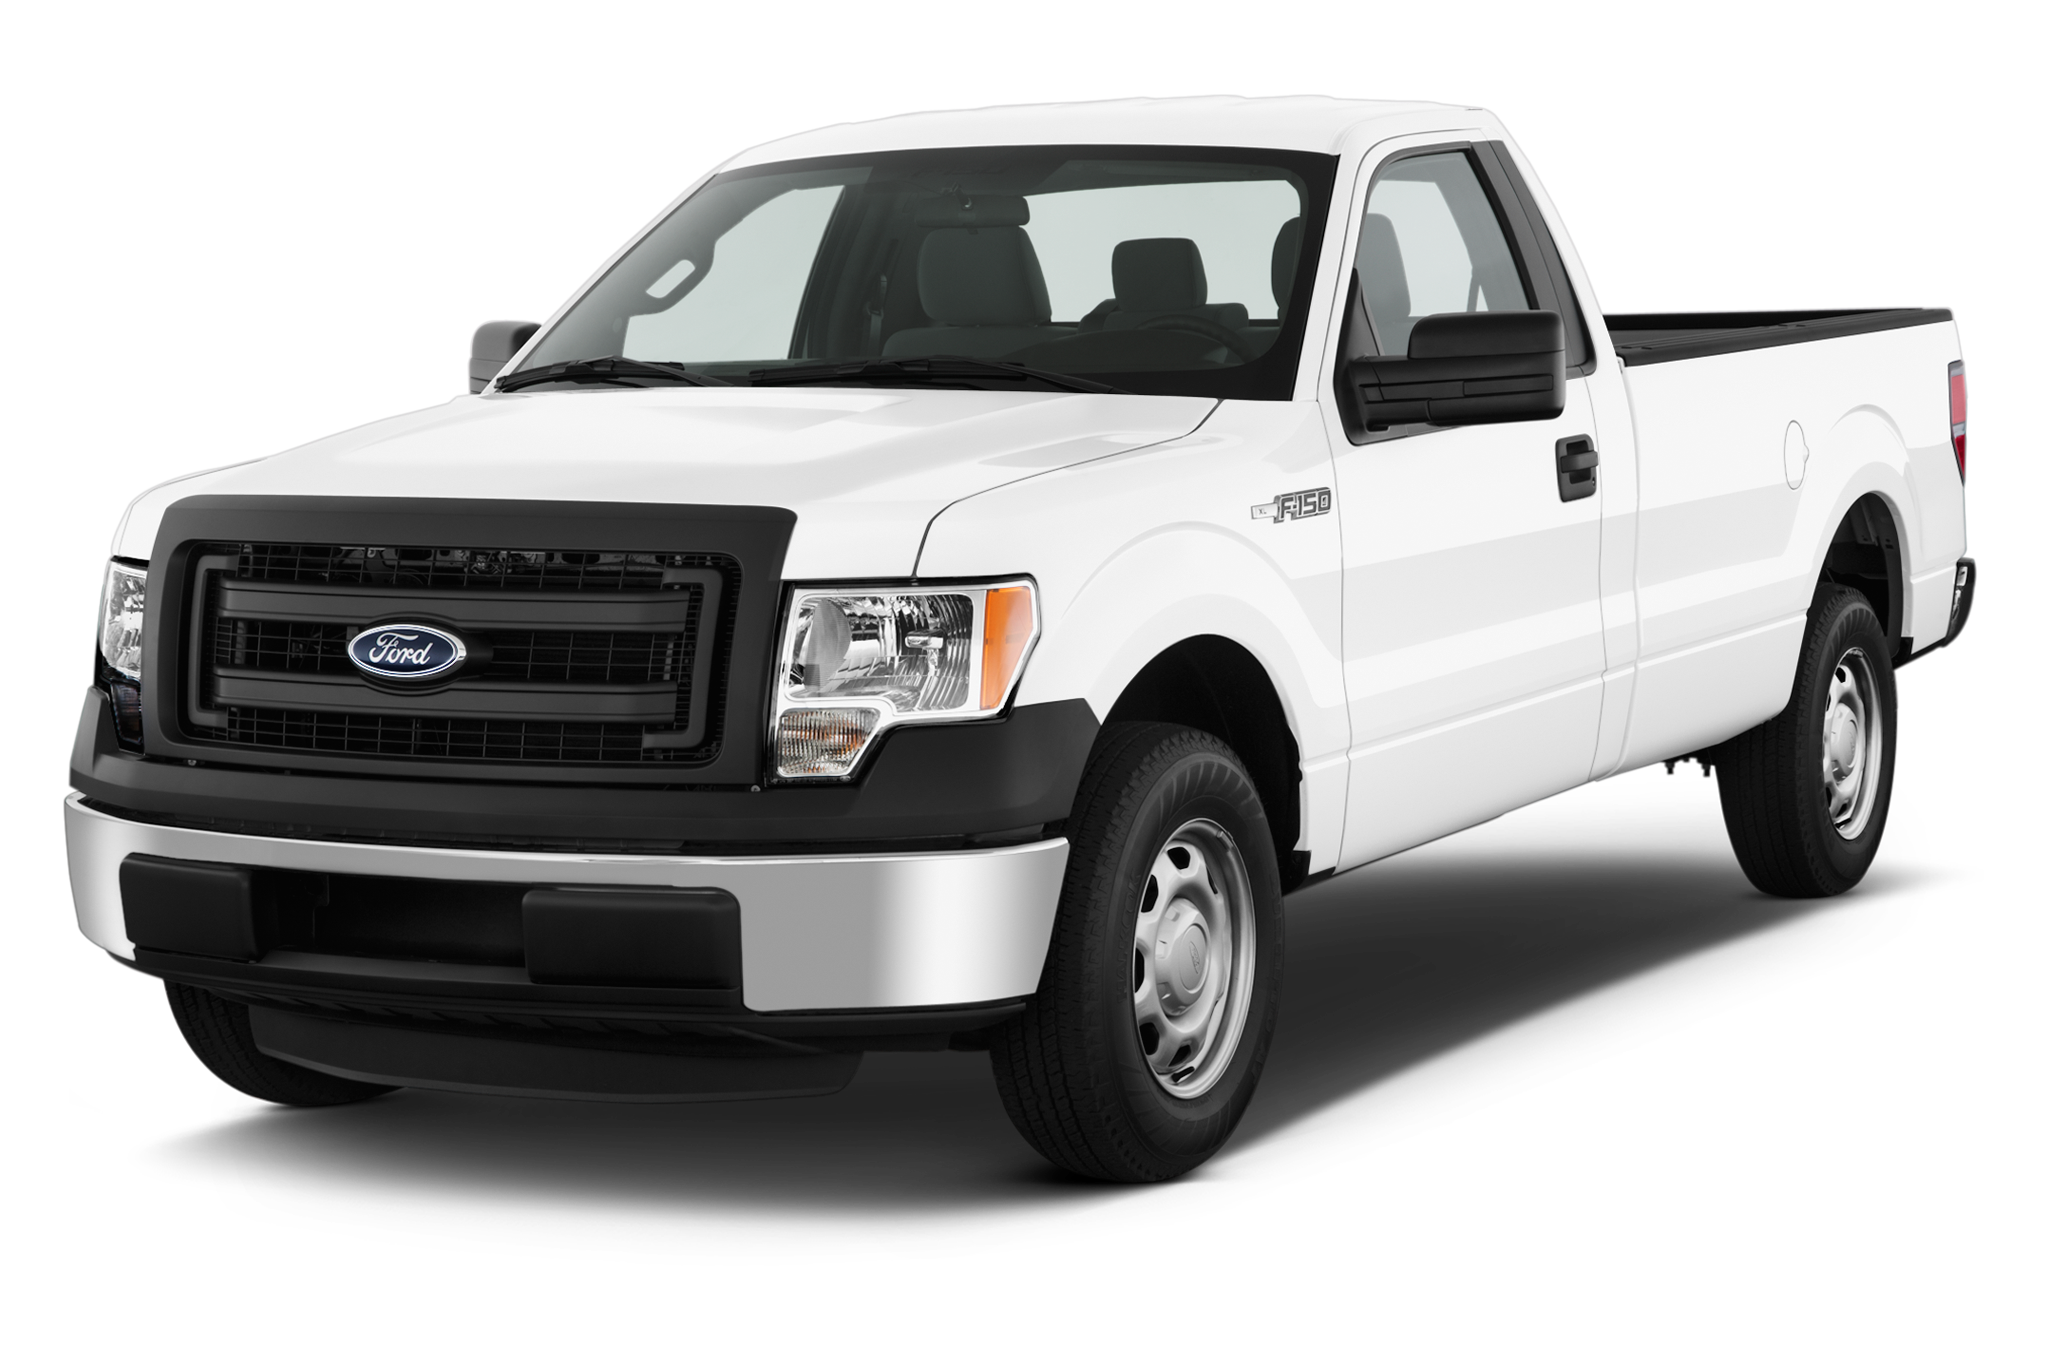 2014 Ford F 150 Stx 4x4 Regular Cab 126 In Overview Msn Autos